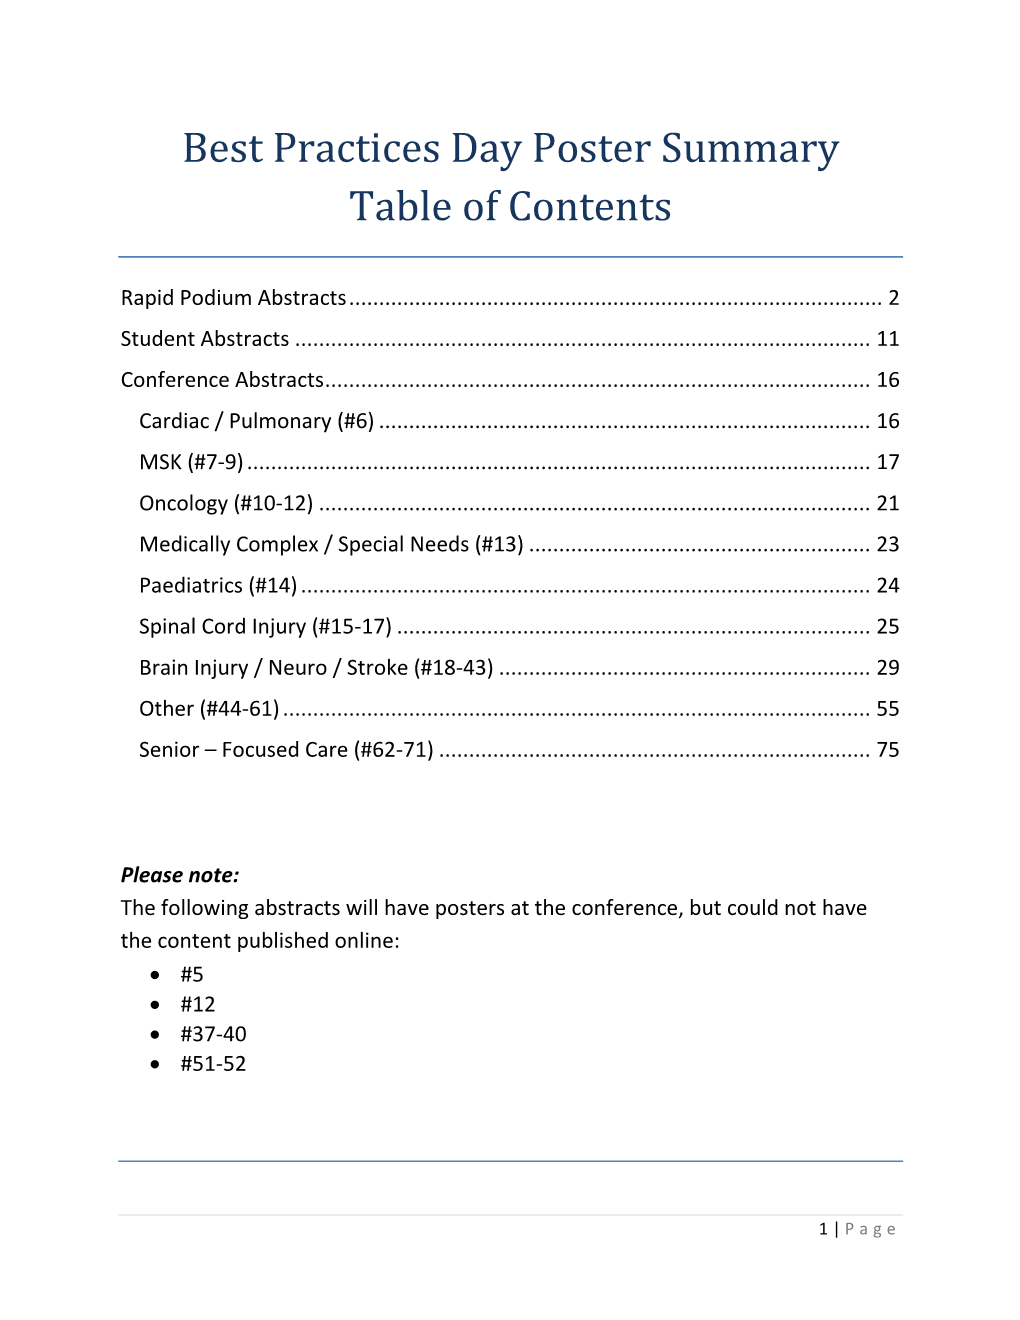 Best Practices Day Poster Summary Table of Contents